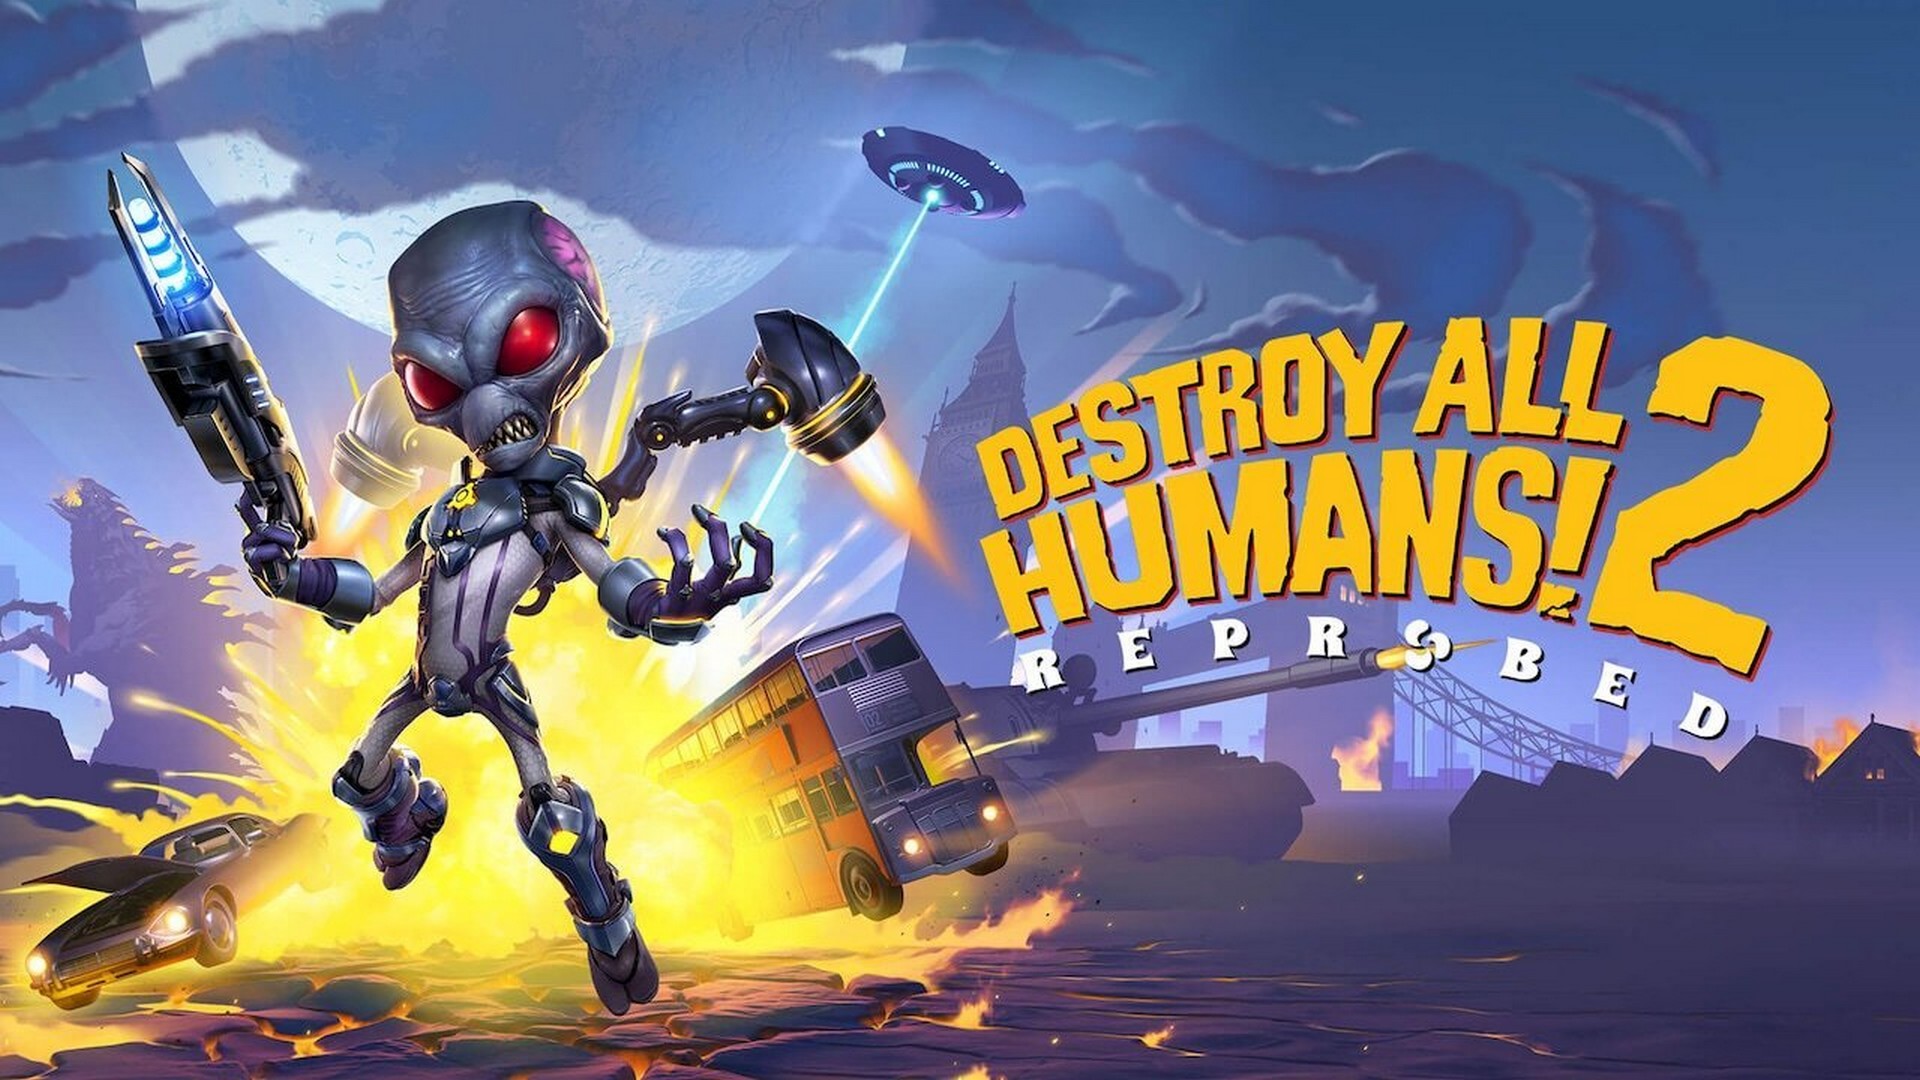 Challenge Accepted! Destroy All Humans! 2 Gets A New DLC